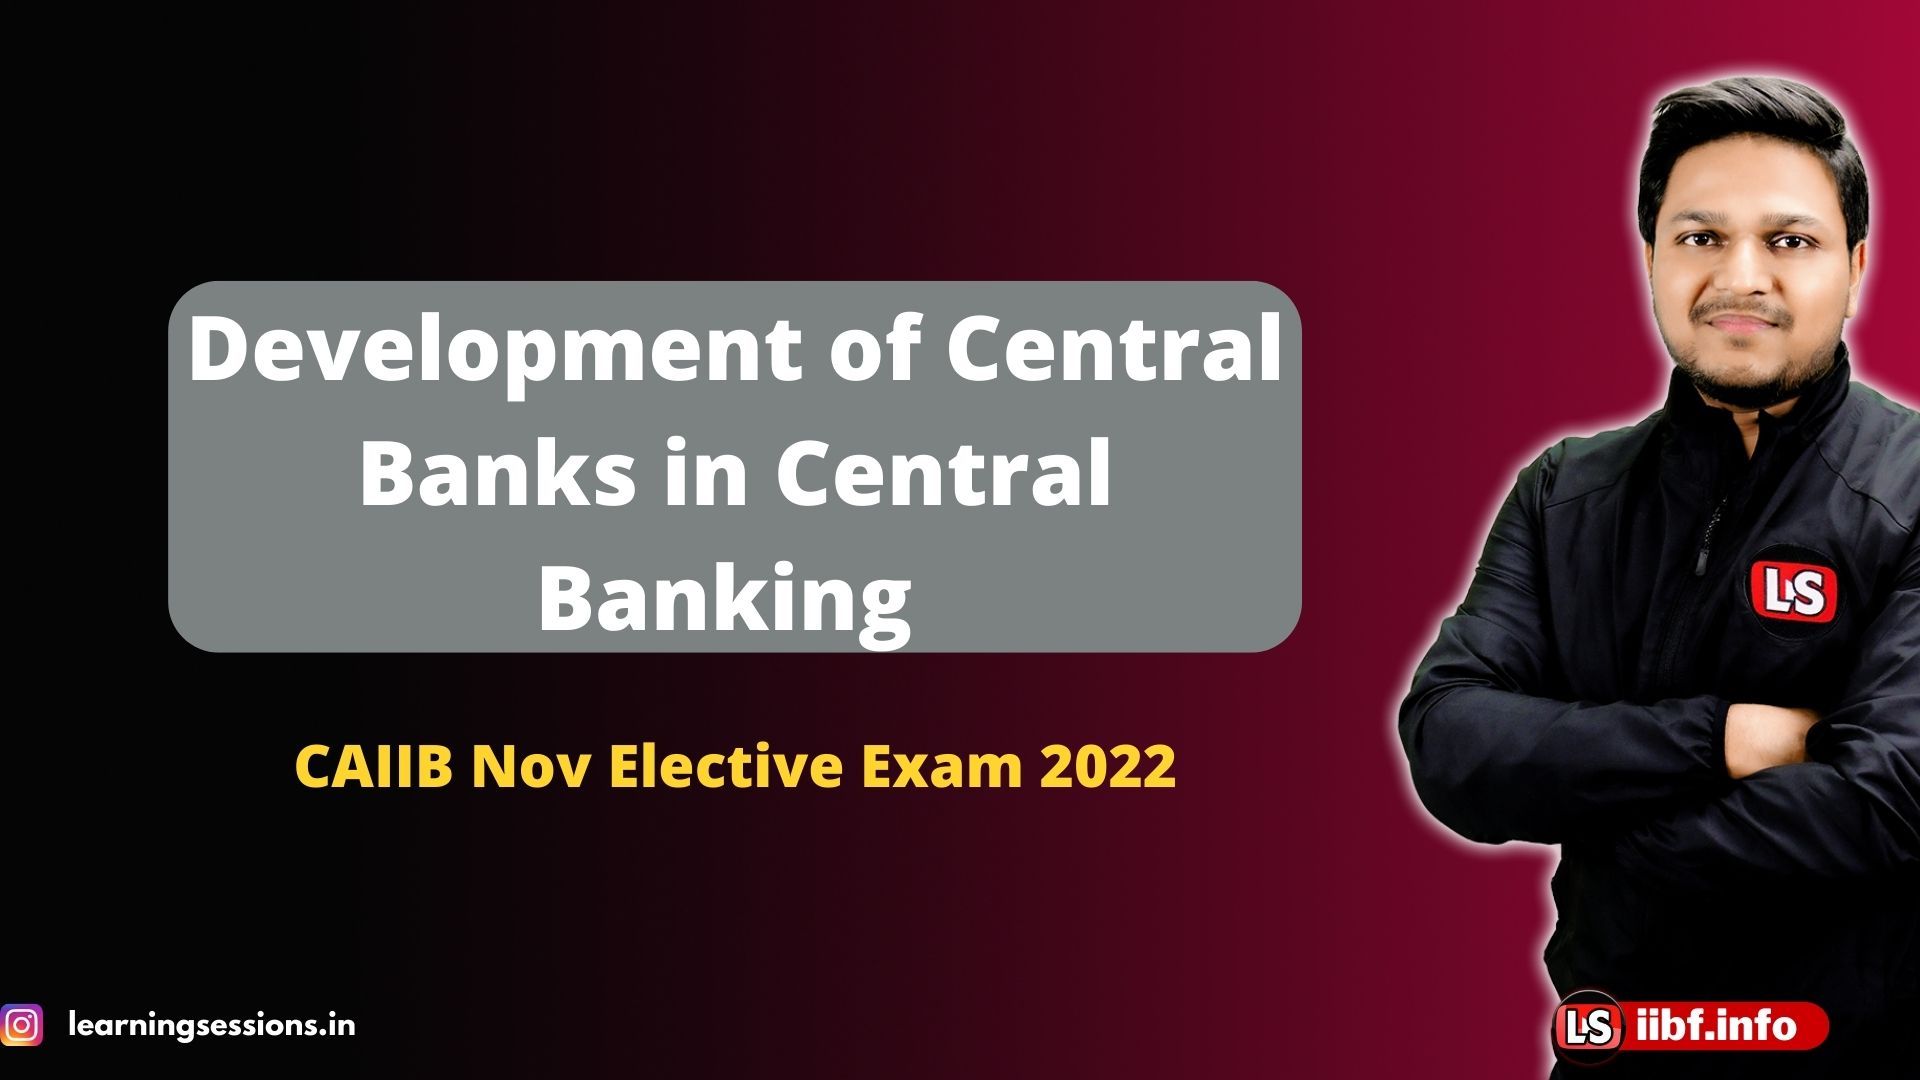 Development of Central Banks in Central Banking | CAIIB Nov Elective Exam 2022